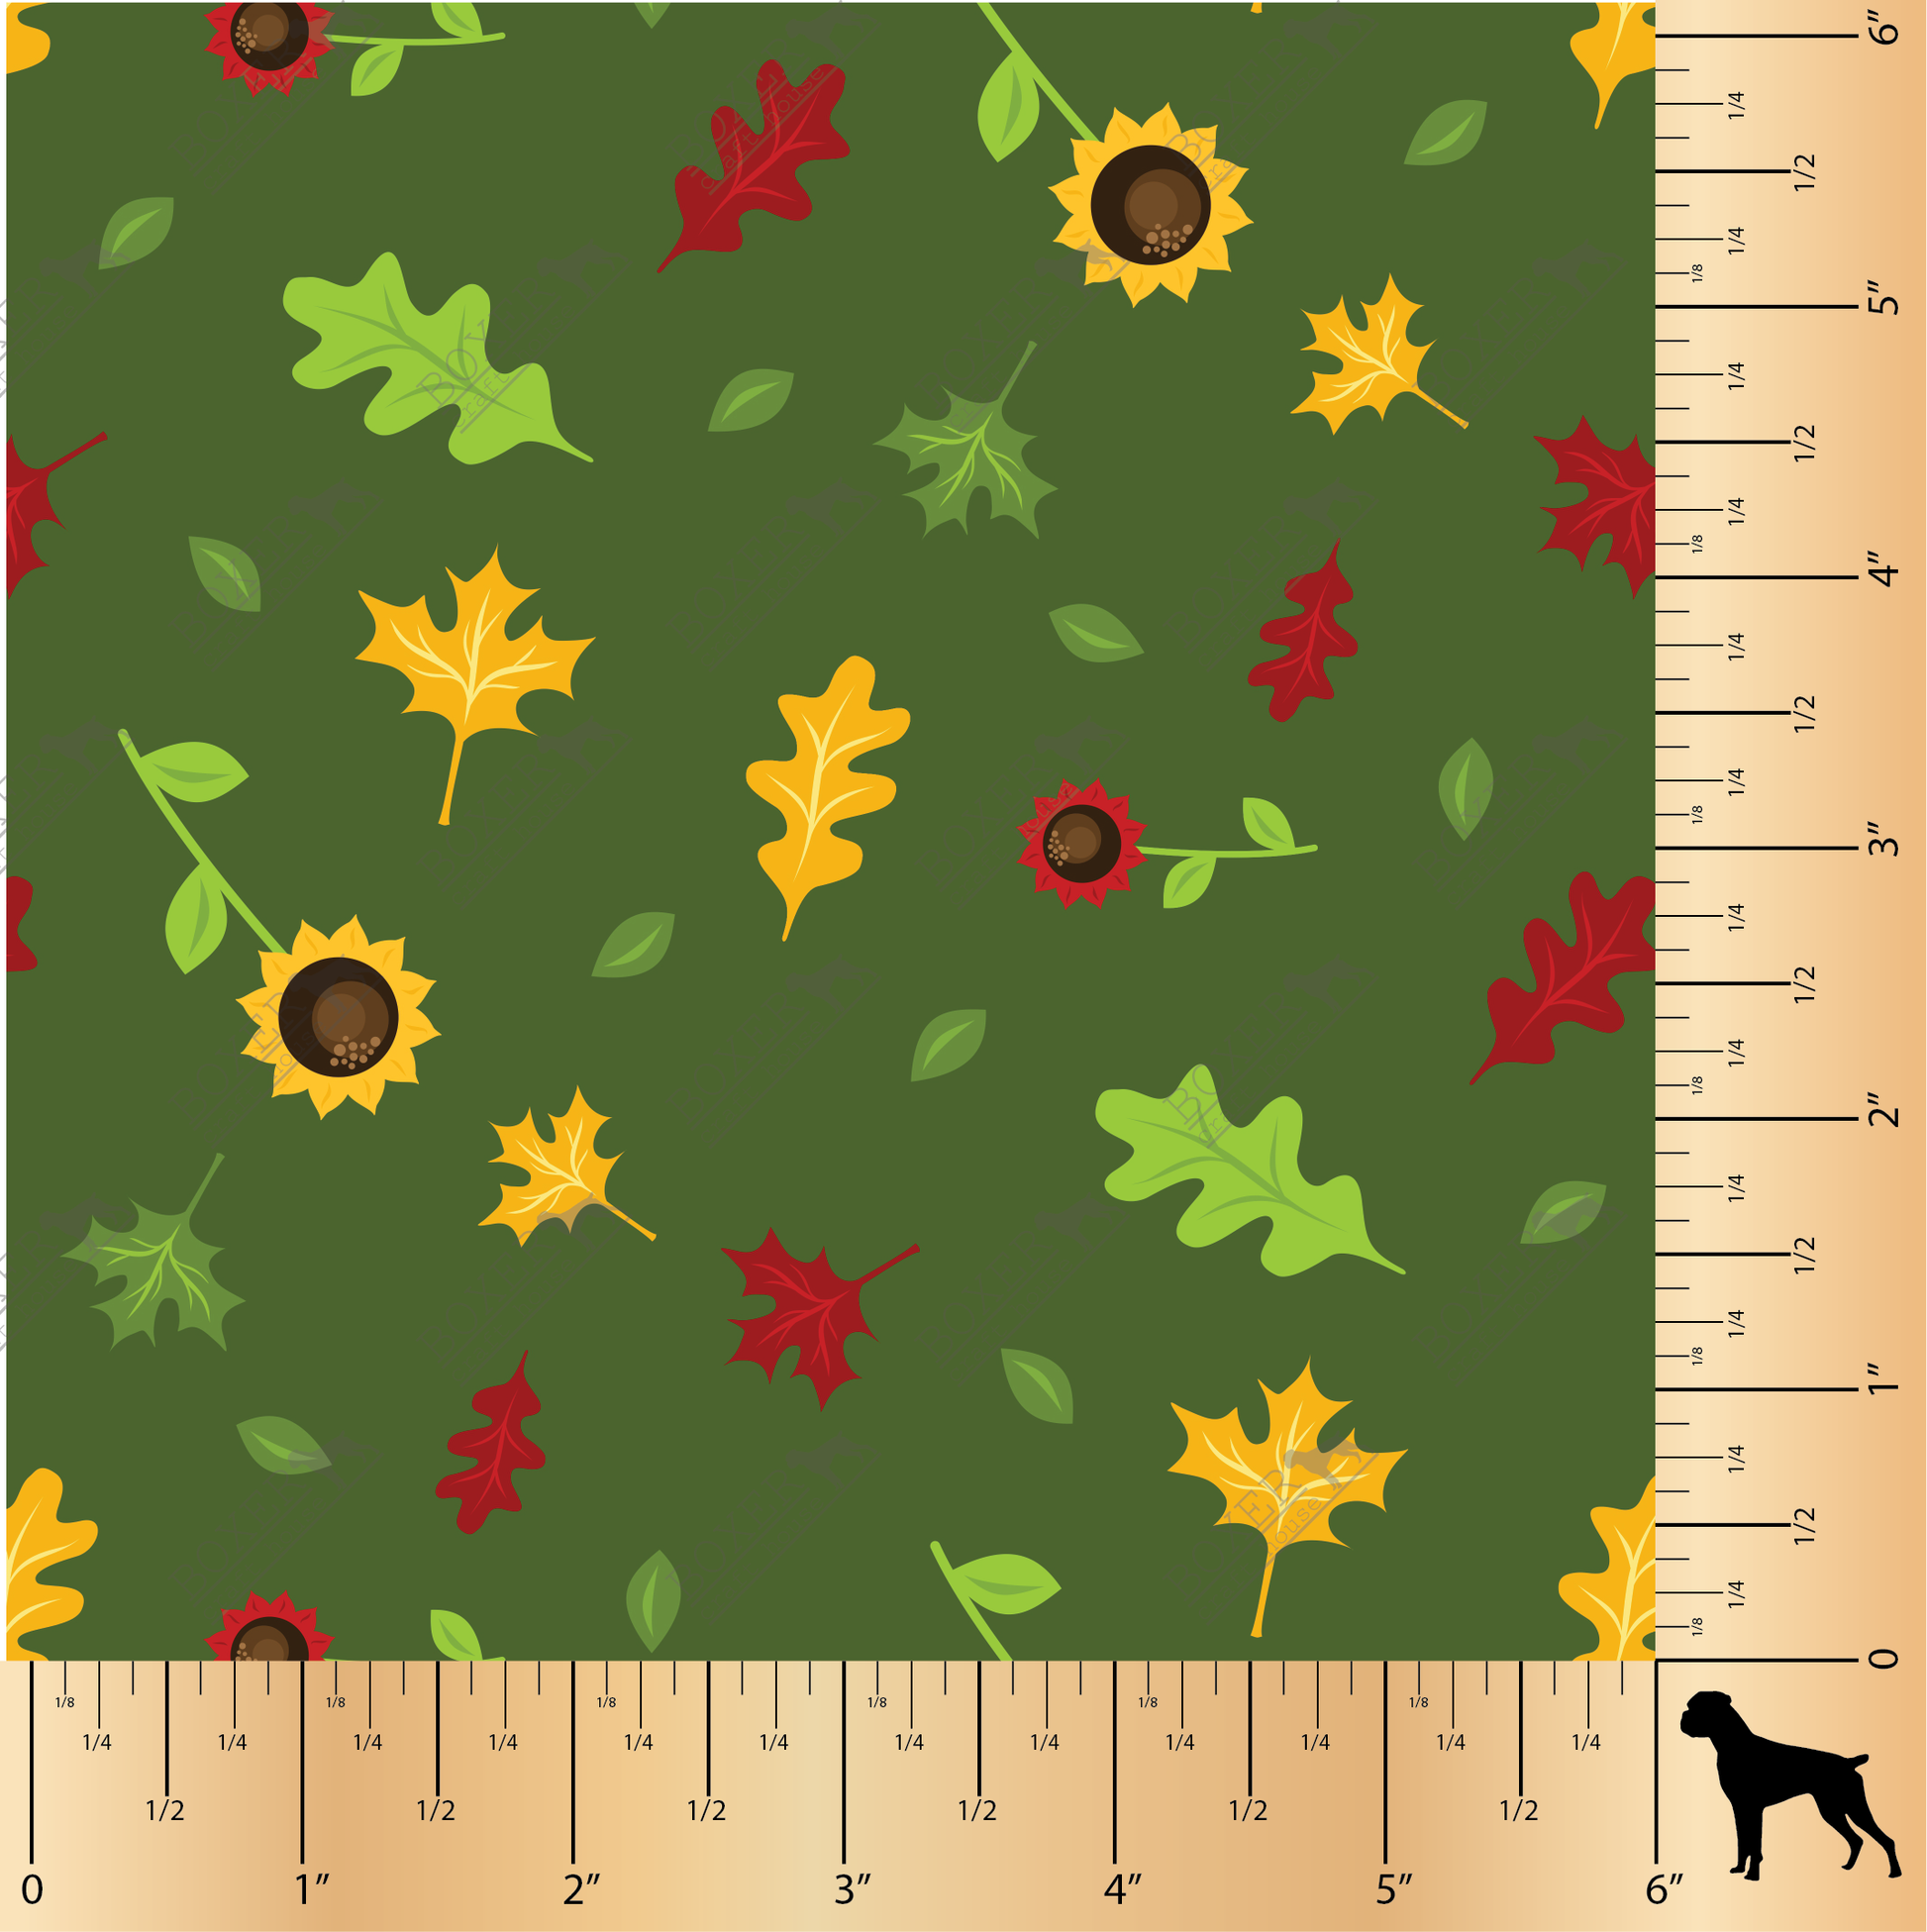 Autumn Themed Faux Leather, Embroidery Vinyl, Sewing Faux Leather, Bag Making Supplies, Faux Leather For Embroidery, Quality Faux Leather, Embroidery Supplies, Sewing Supplies, Woman Owned Business, Craft Supply Store, USA, In the Hoop Supplies, Sewing with vinyl,Specialty Vinyl, Printed in the USA Faux Leather, Apples, Fall, Plaids, Orange, Crisp Air,